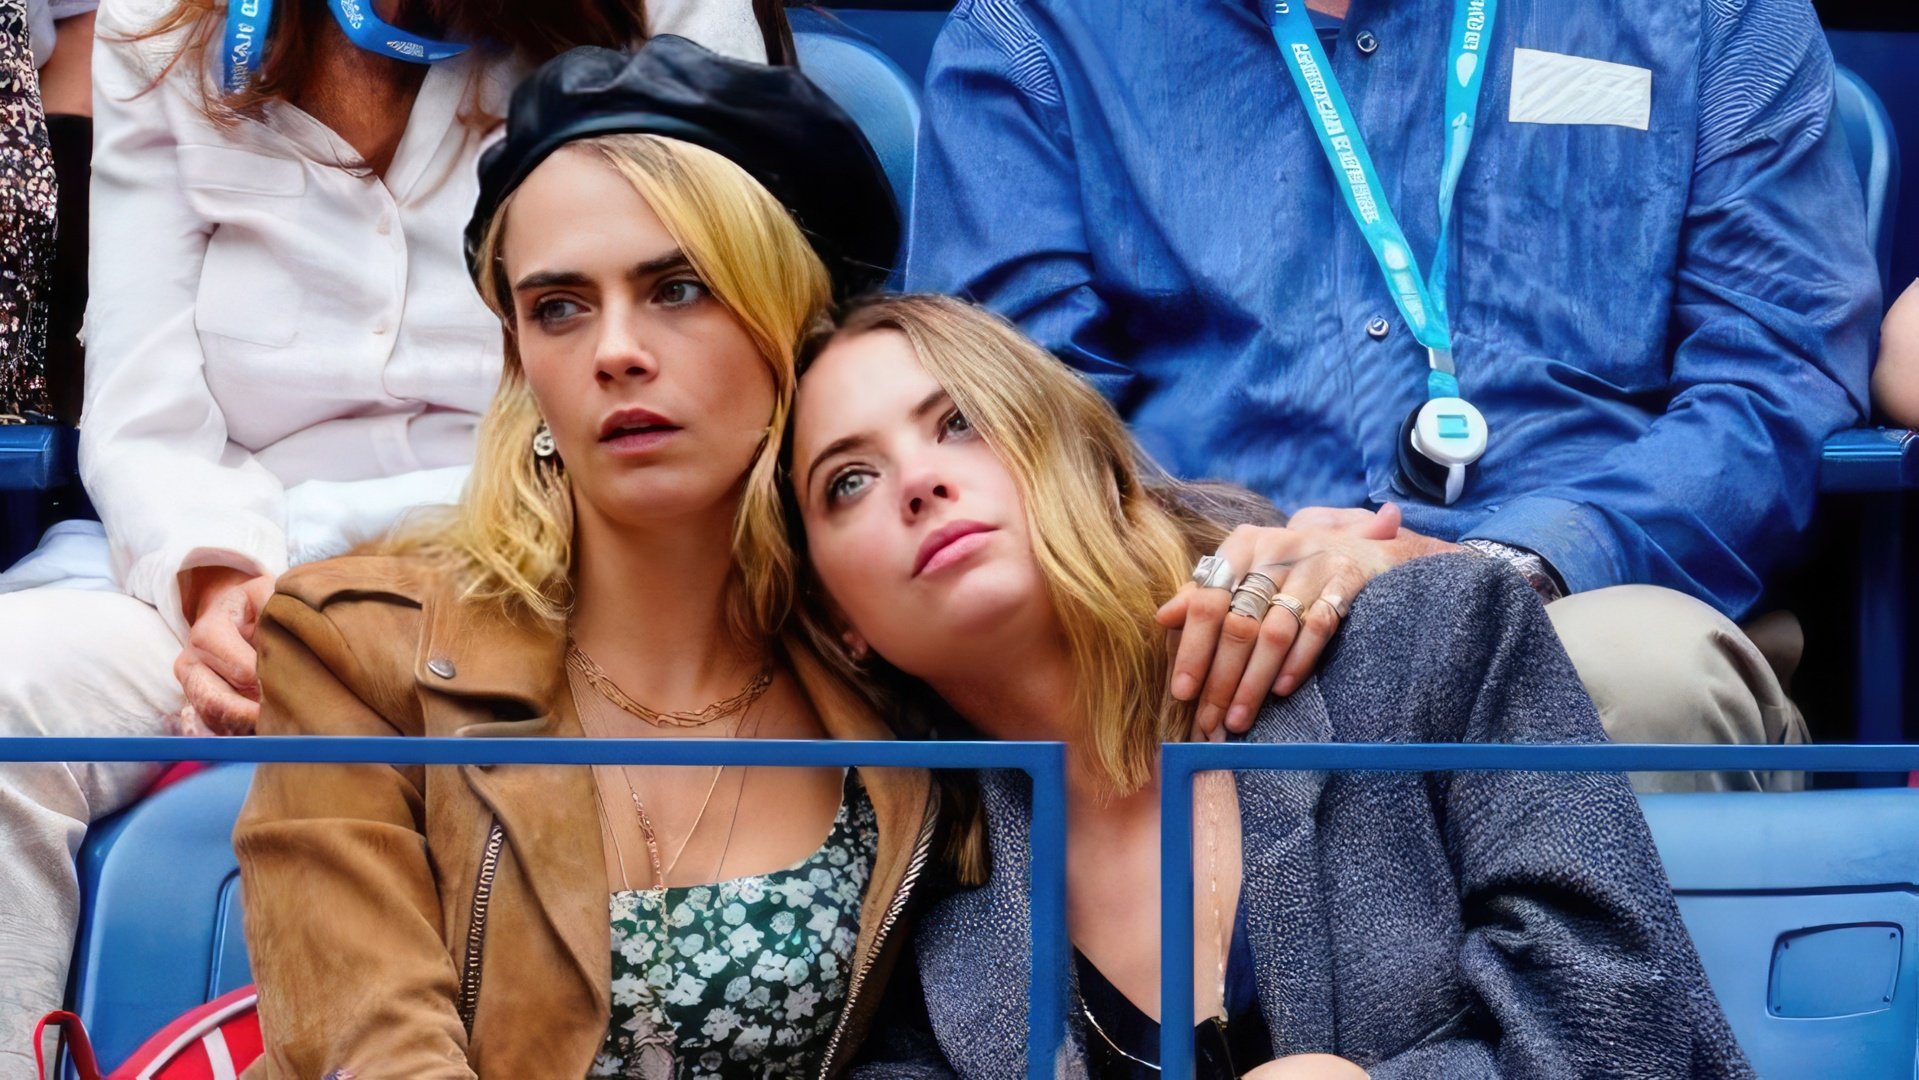 Cara Delevingne and her girlfriend Ashley Benson